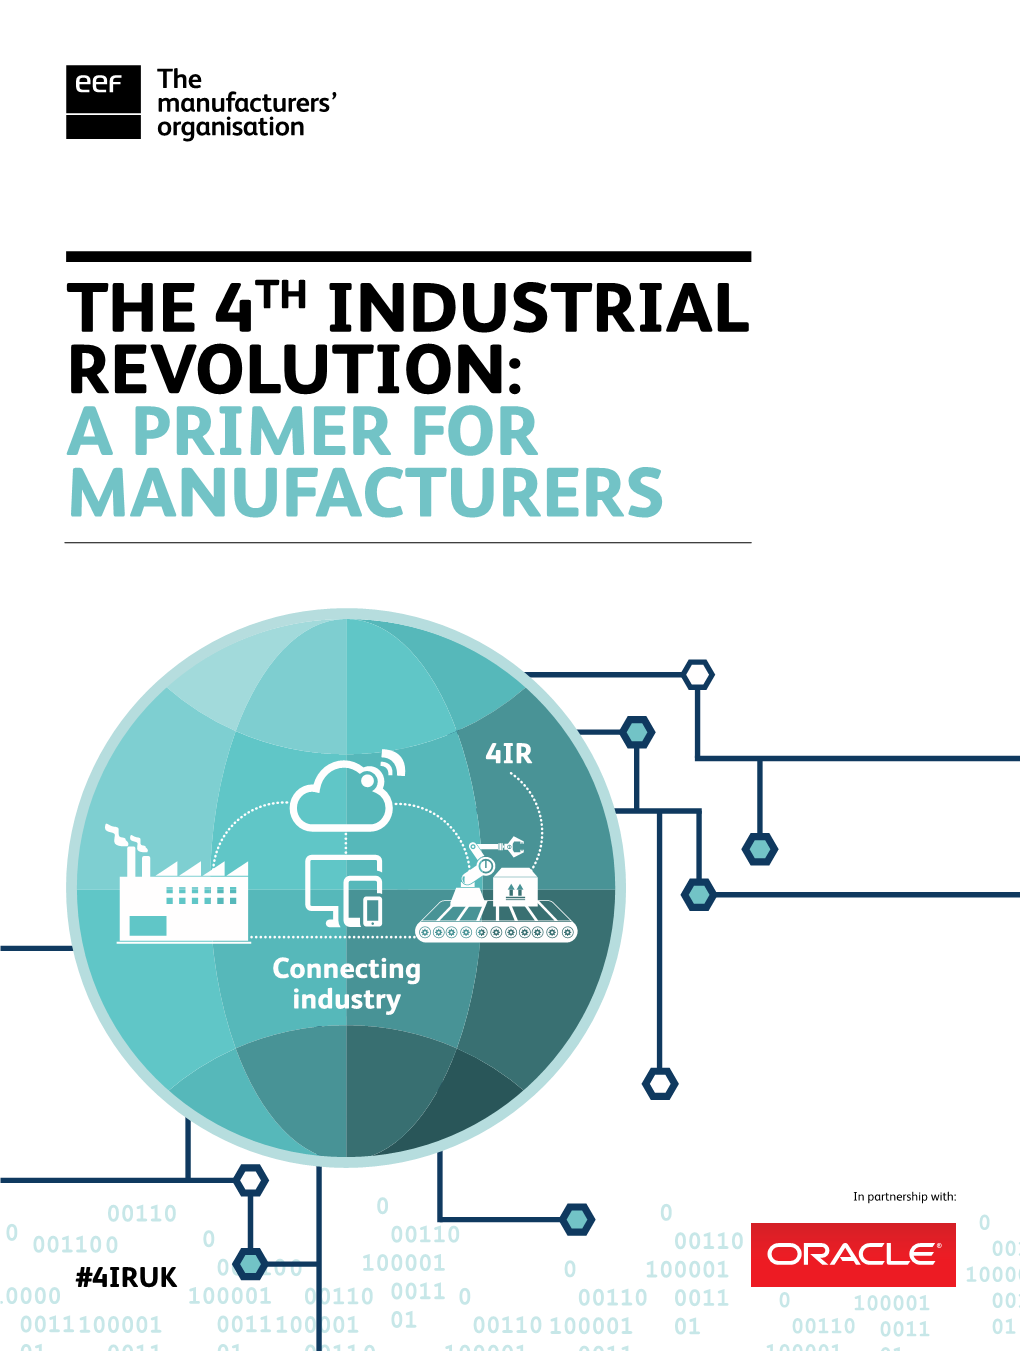 The 4Th Industrial Revolution (4IR) – Hype Or Reality? 4